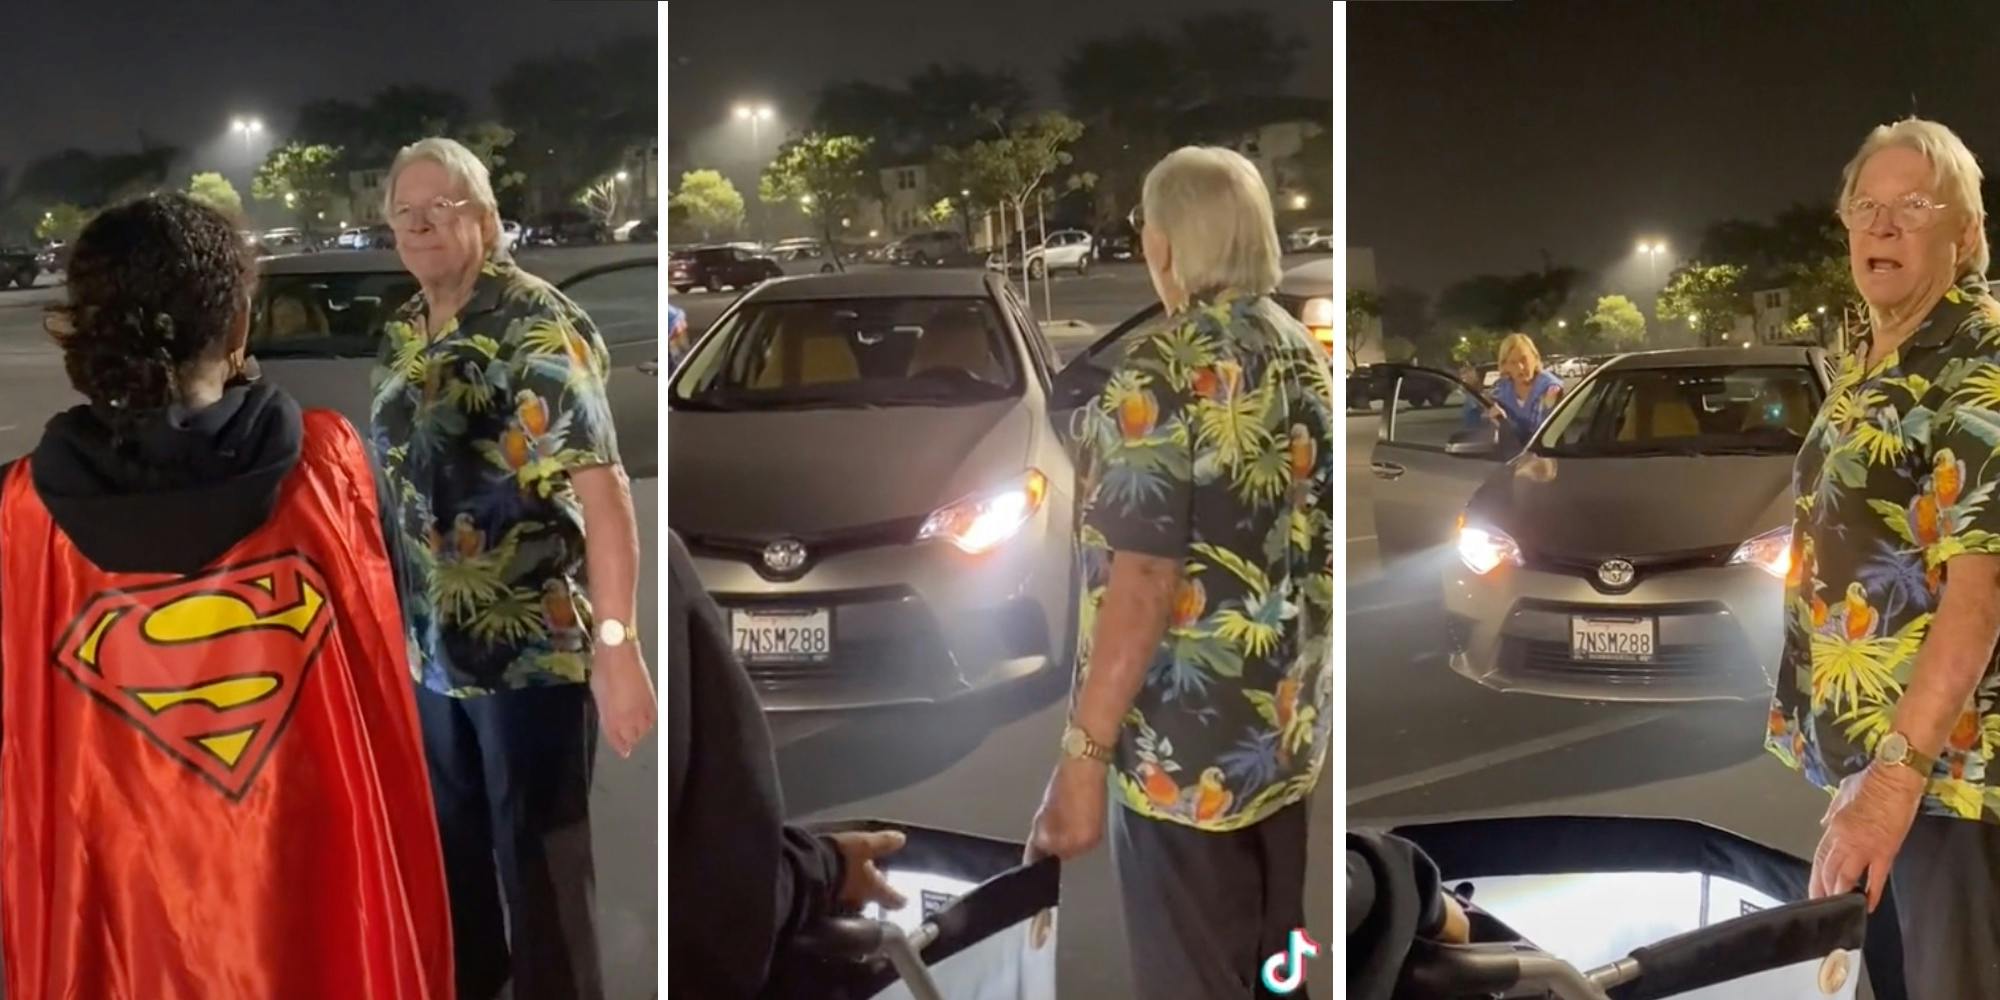 A viral TikTok of a man confronting teens in a Kohl's parking lot